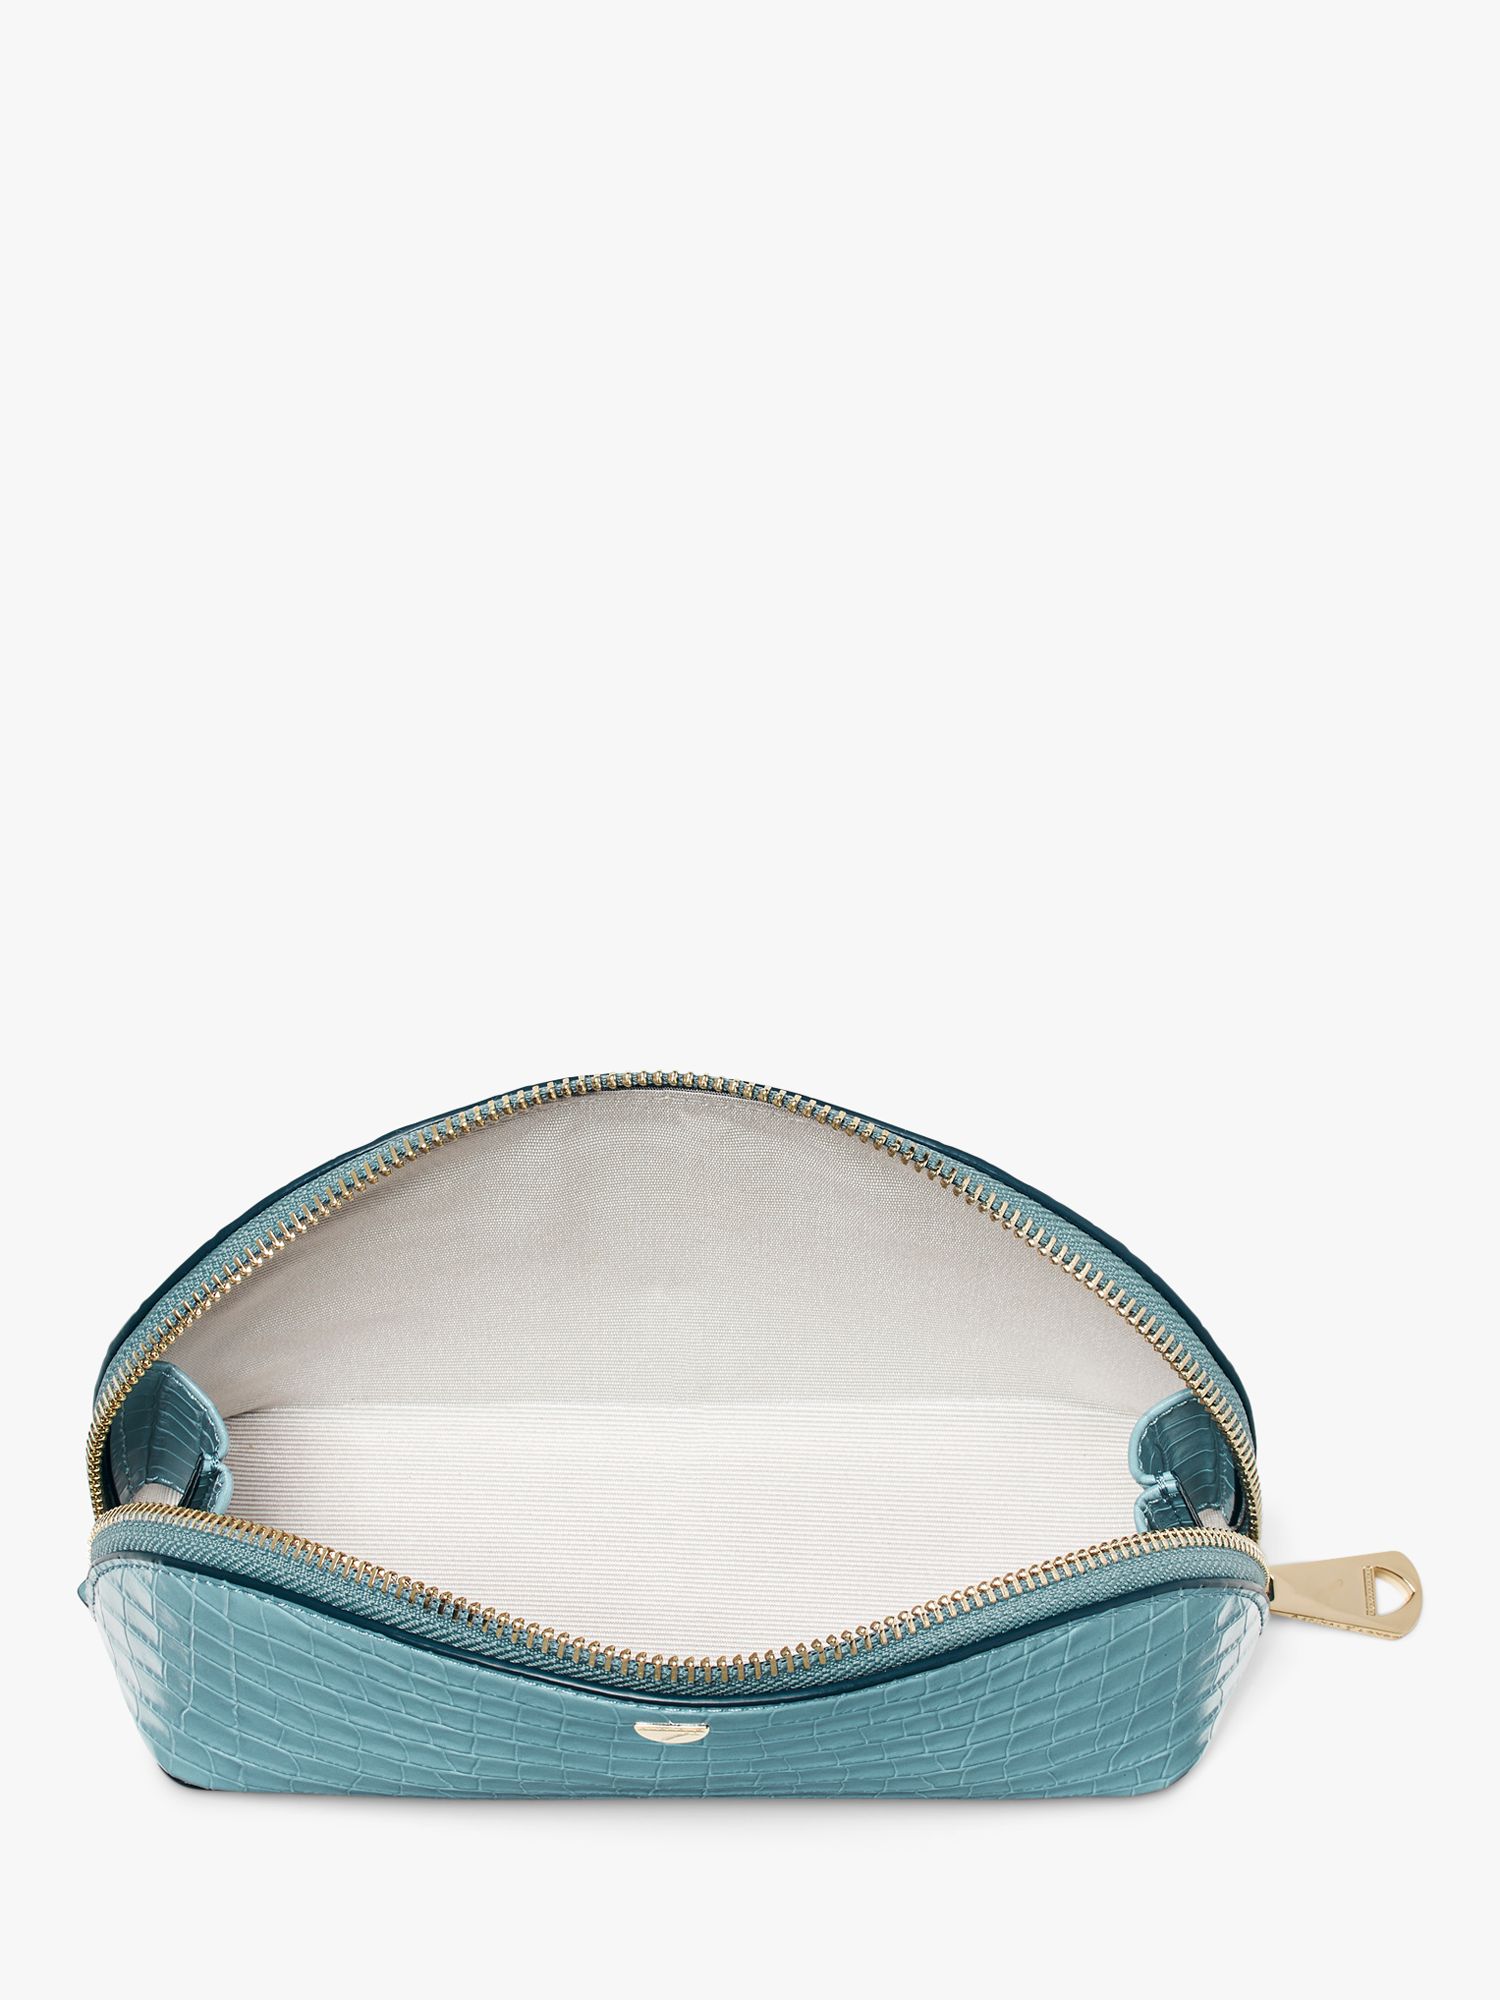 Aspinal of London Small Croc Effect Leather Makeup Bag, Cornflower